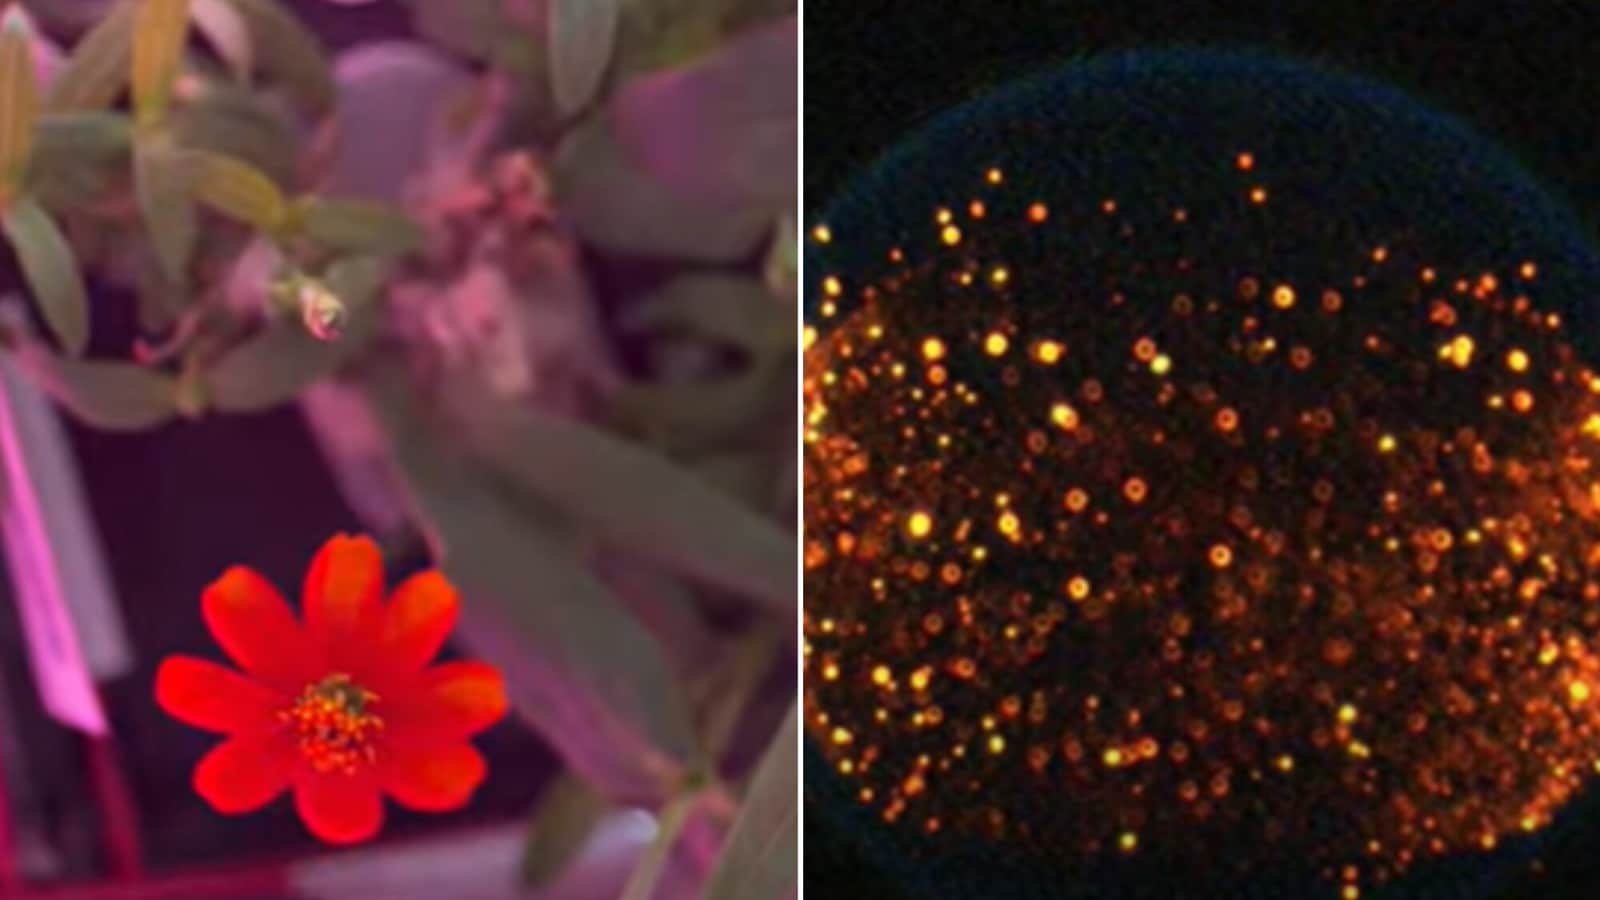 Flower garden to pulsating flames: NASA shares science experiments conducted in space